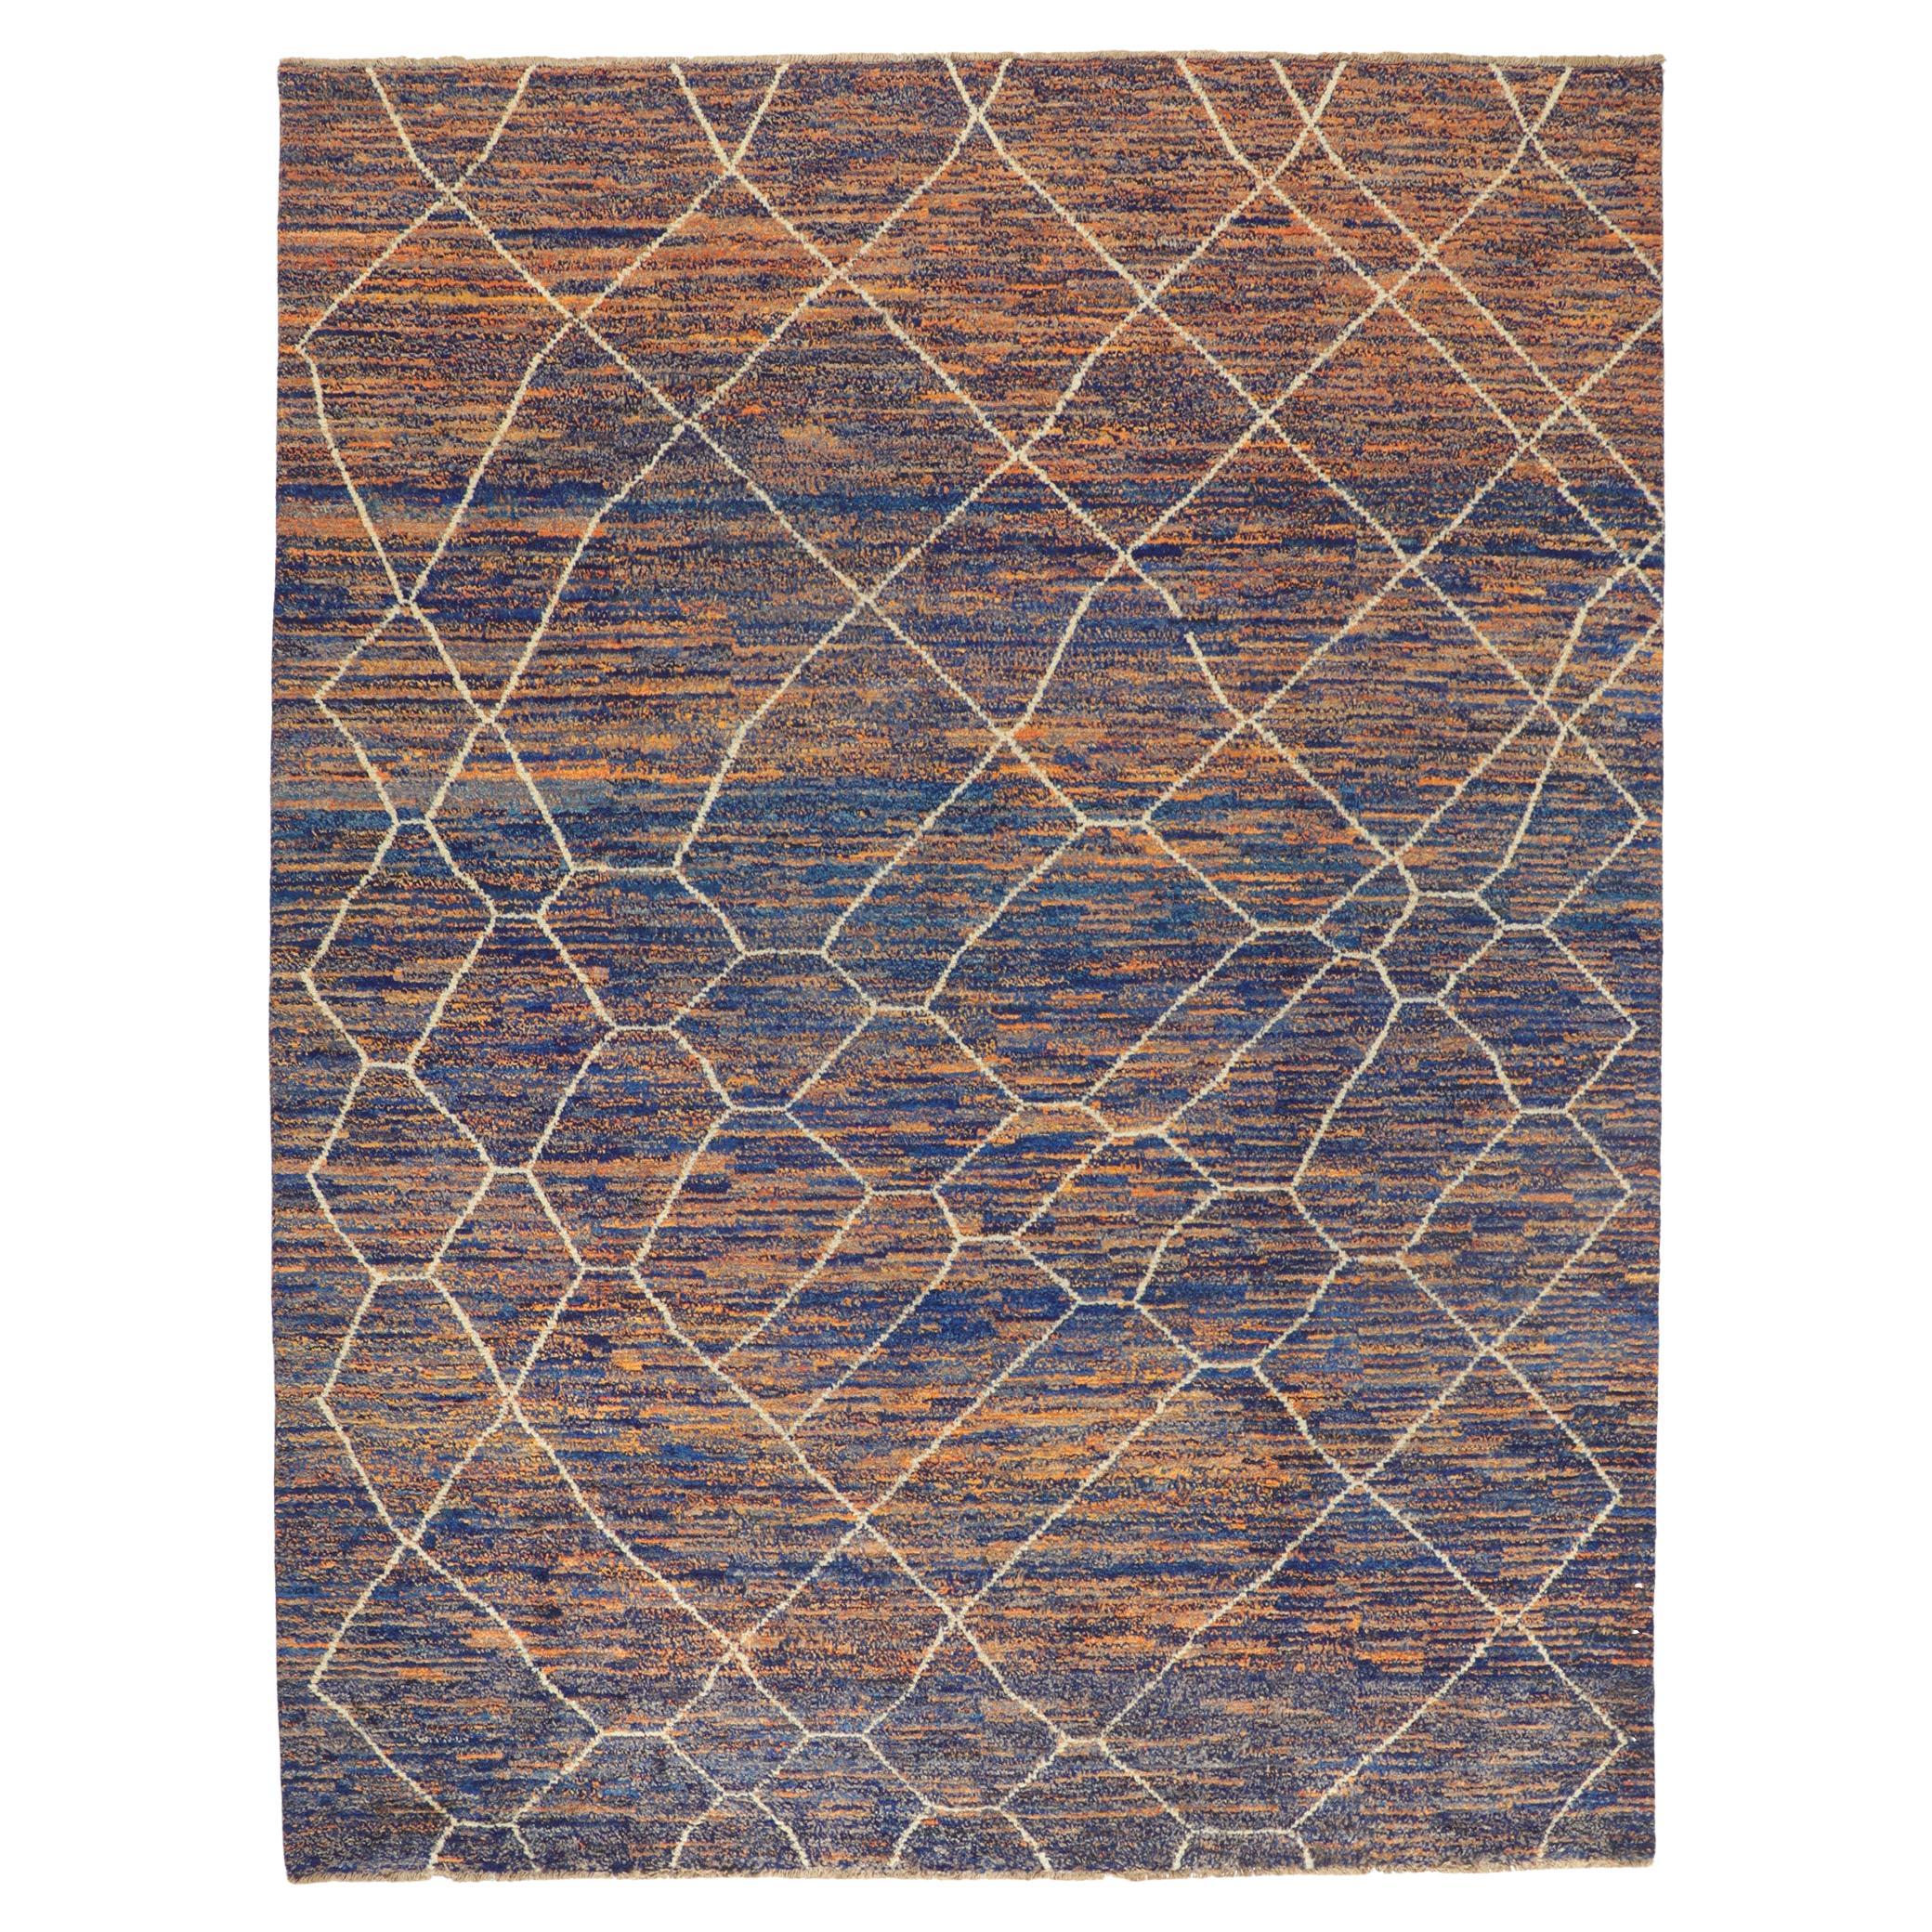 New Large Abstract Moroccan Area Rug